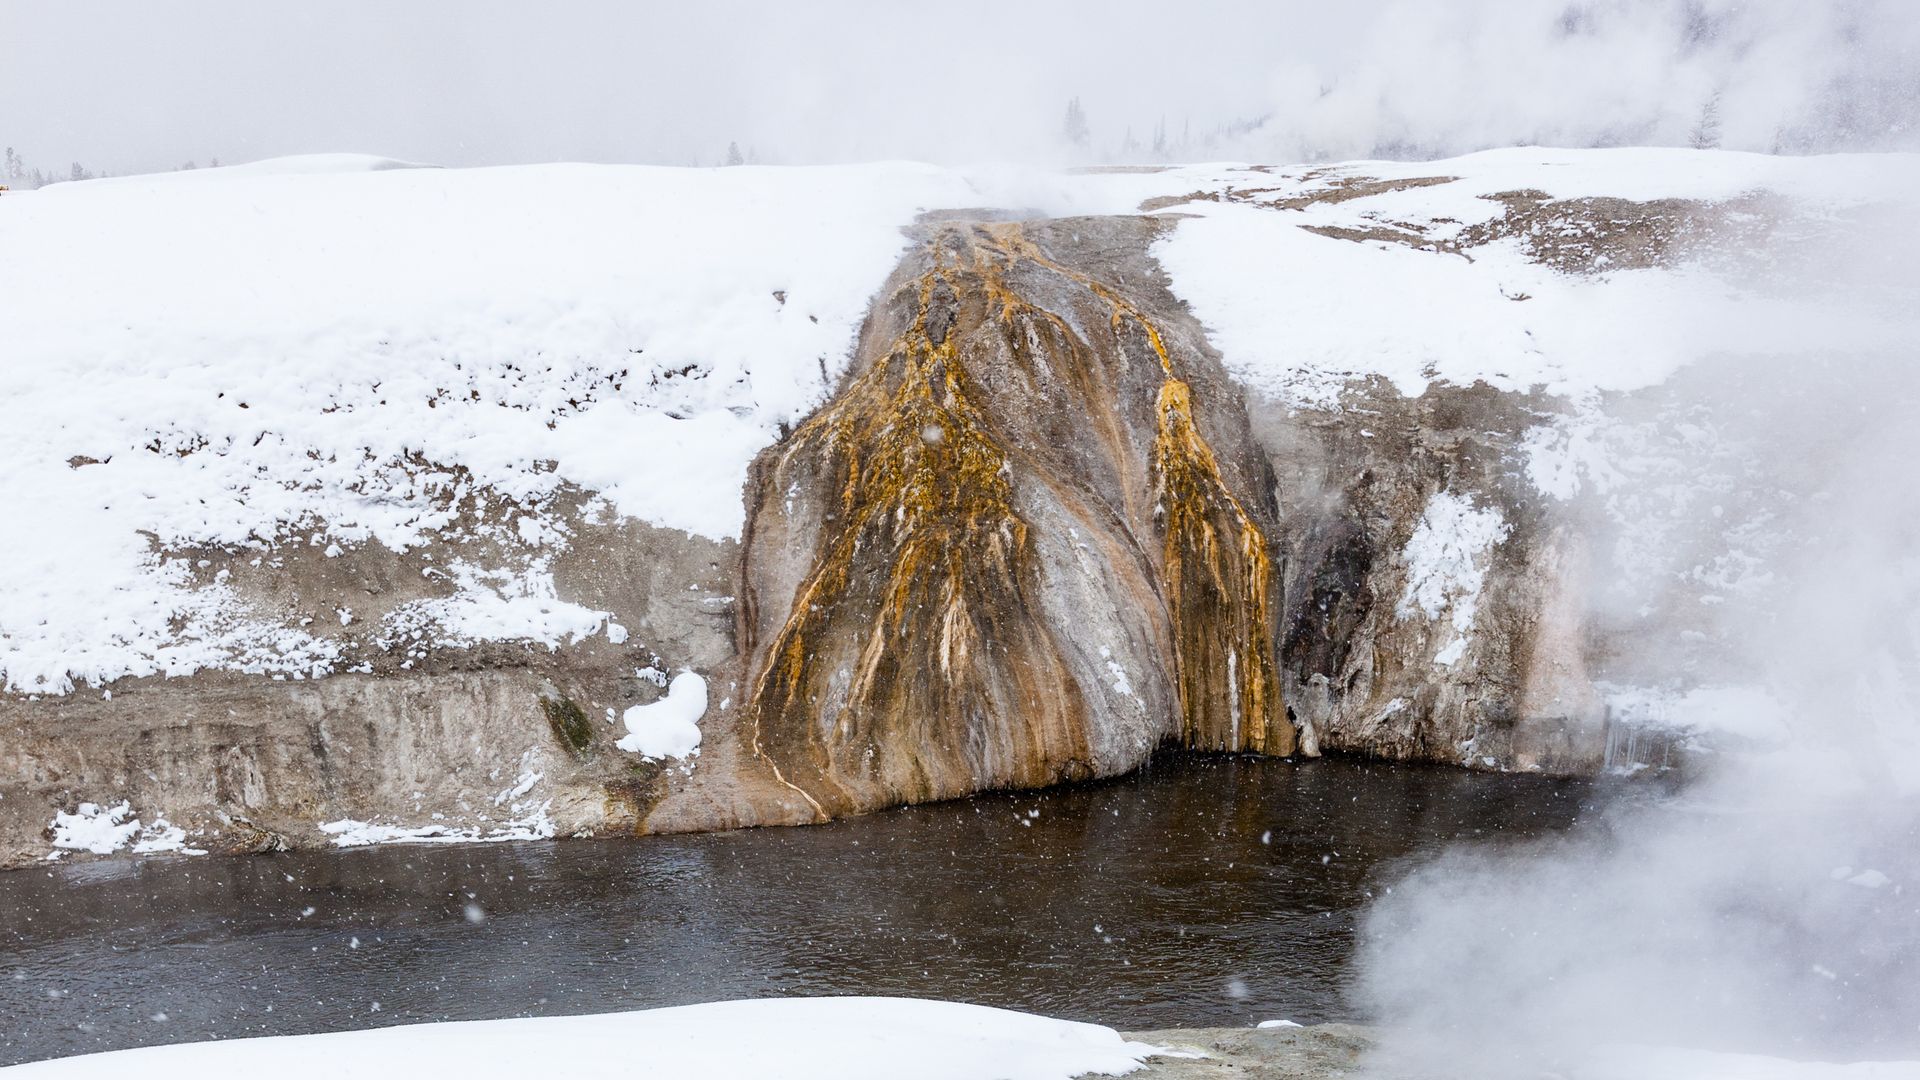 The East Chinaman Spring in Yellowstone National Park is seen.